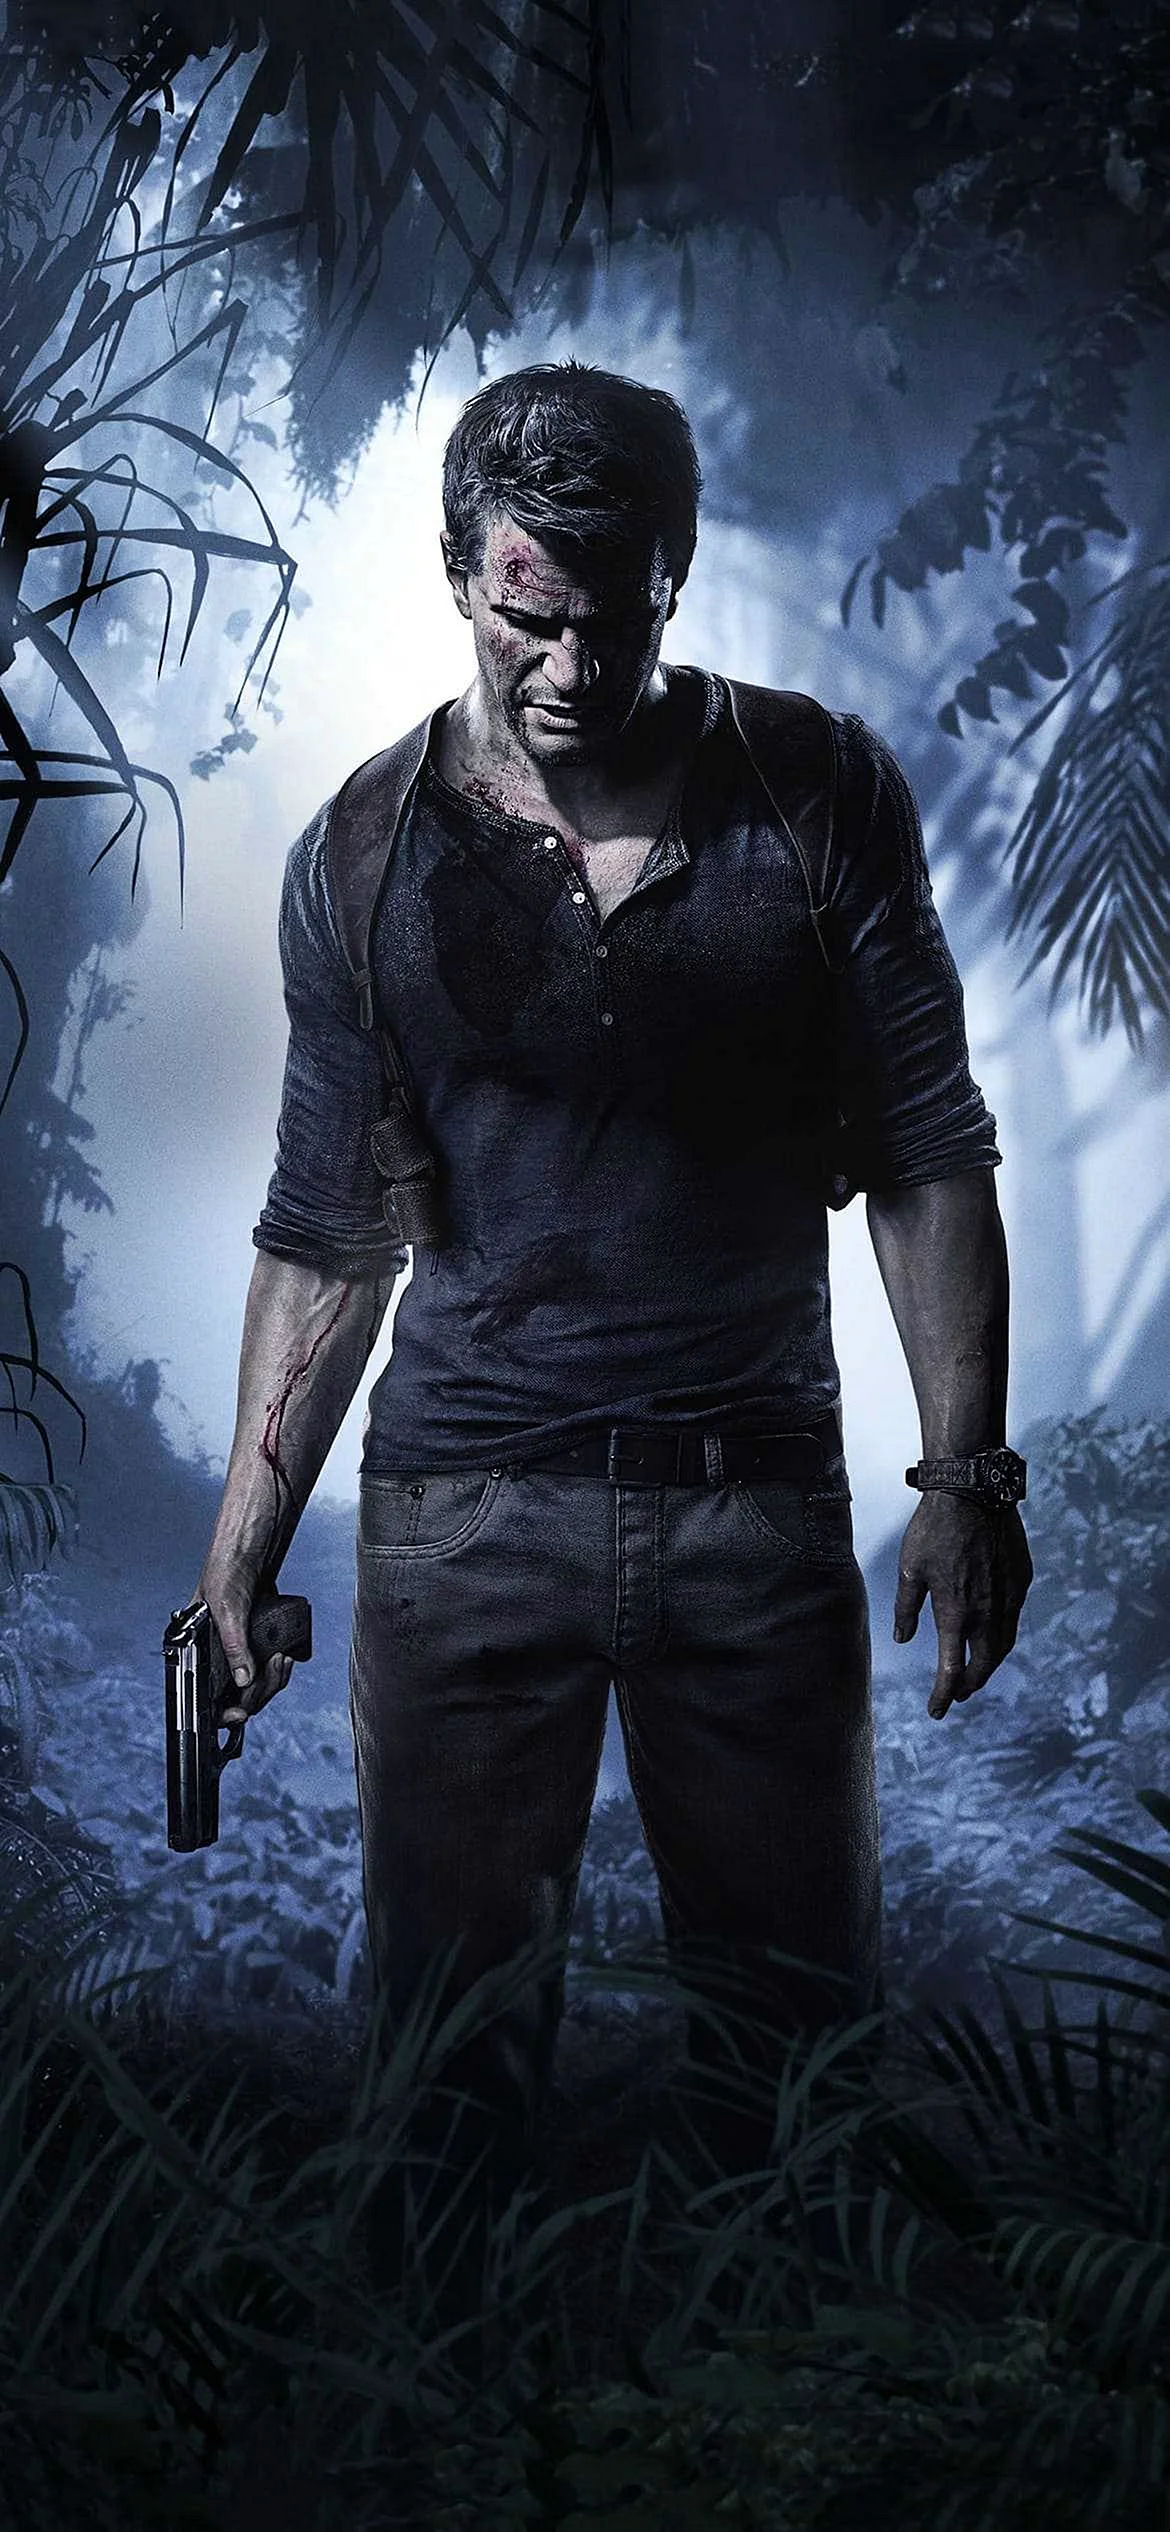 Thiefs End Uncharted 5 Wallpaper for iPhone 13